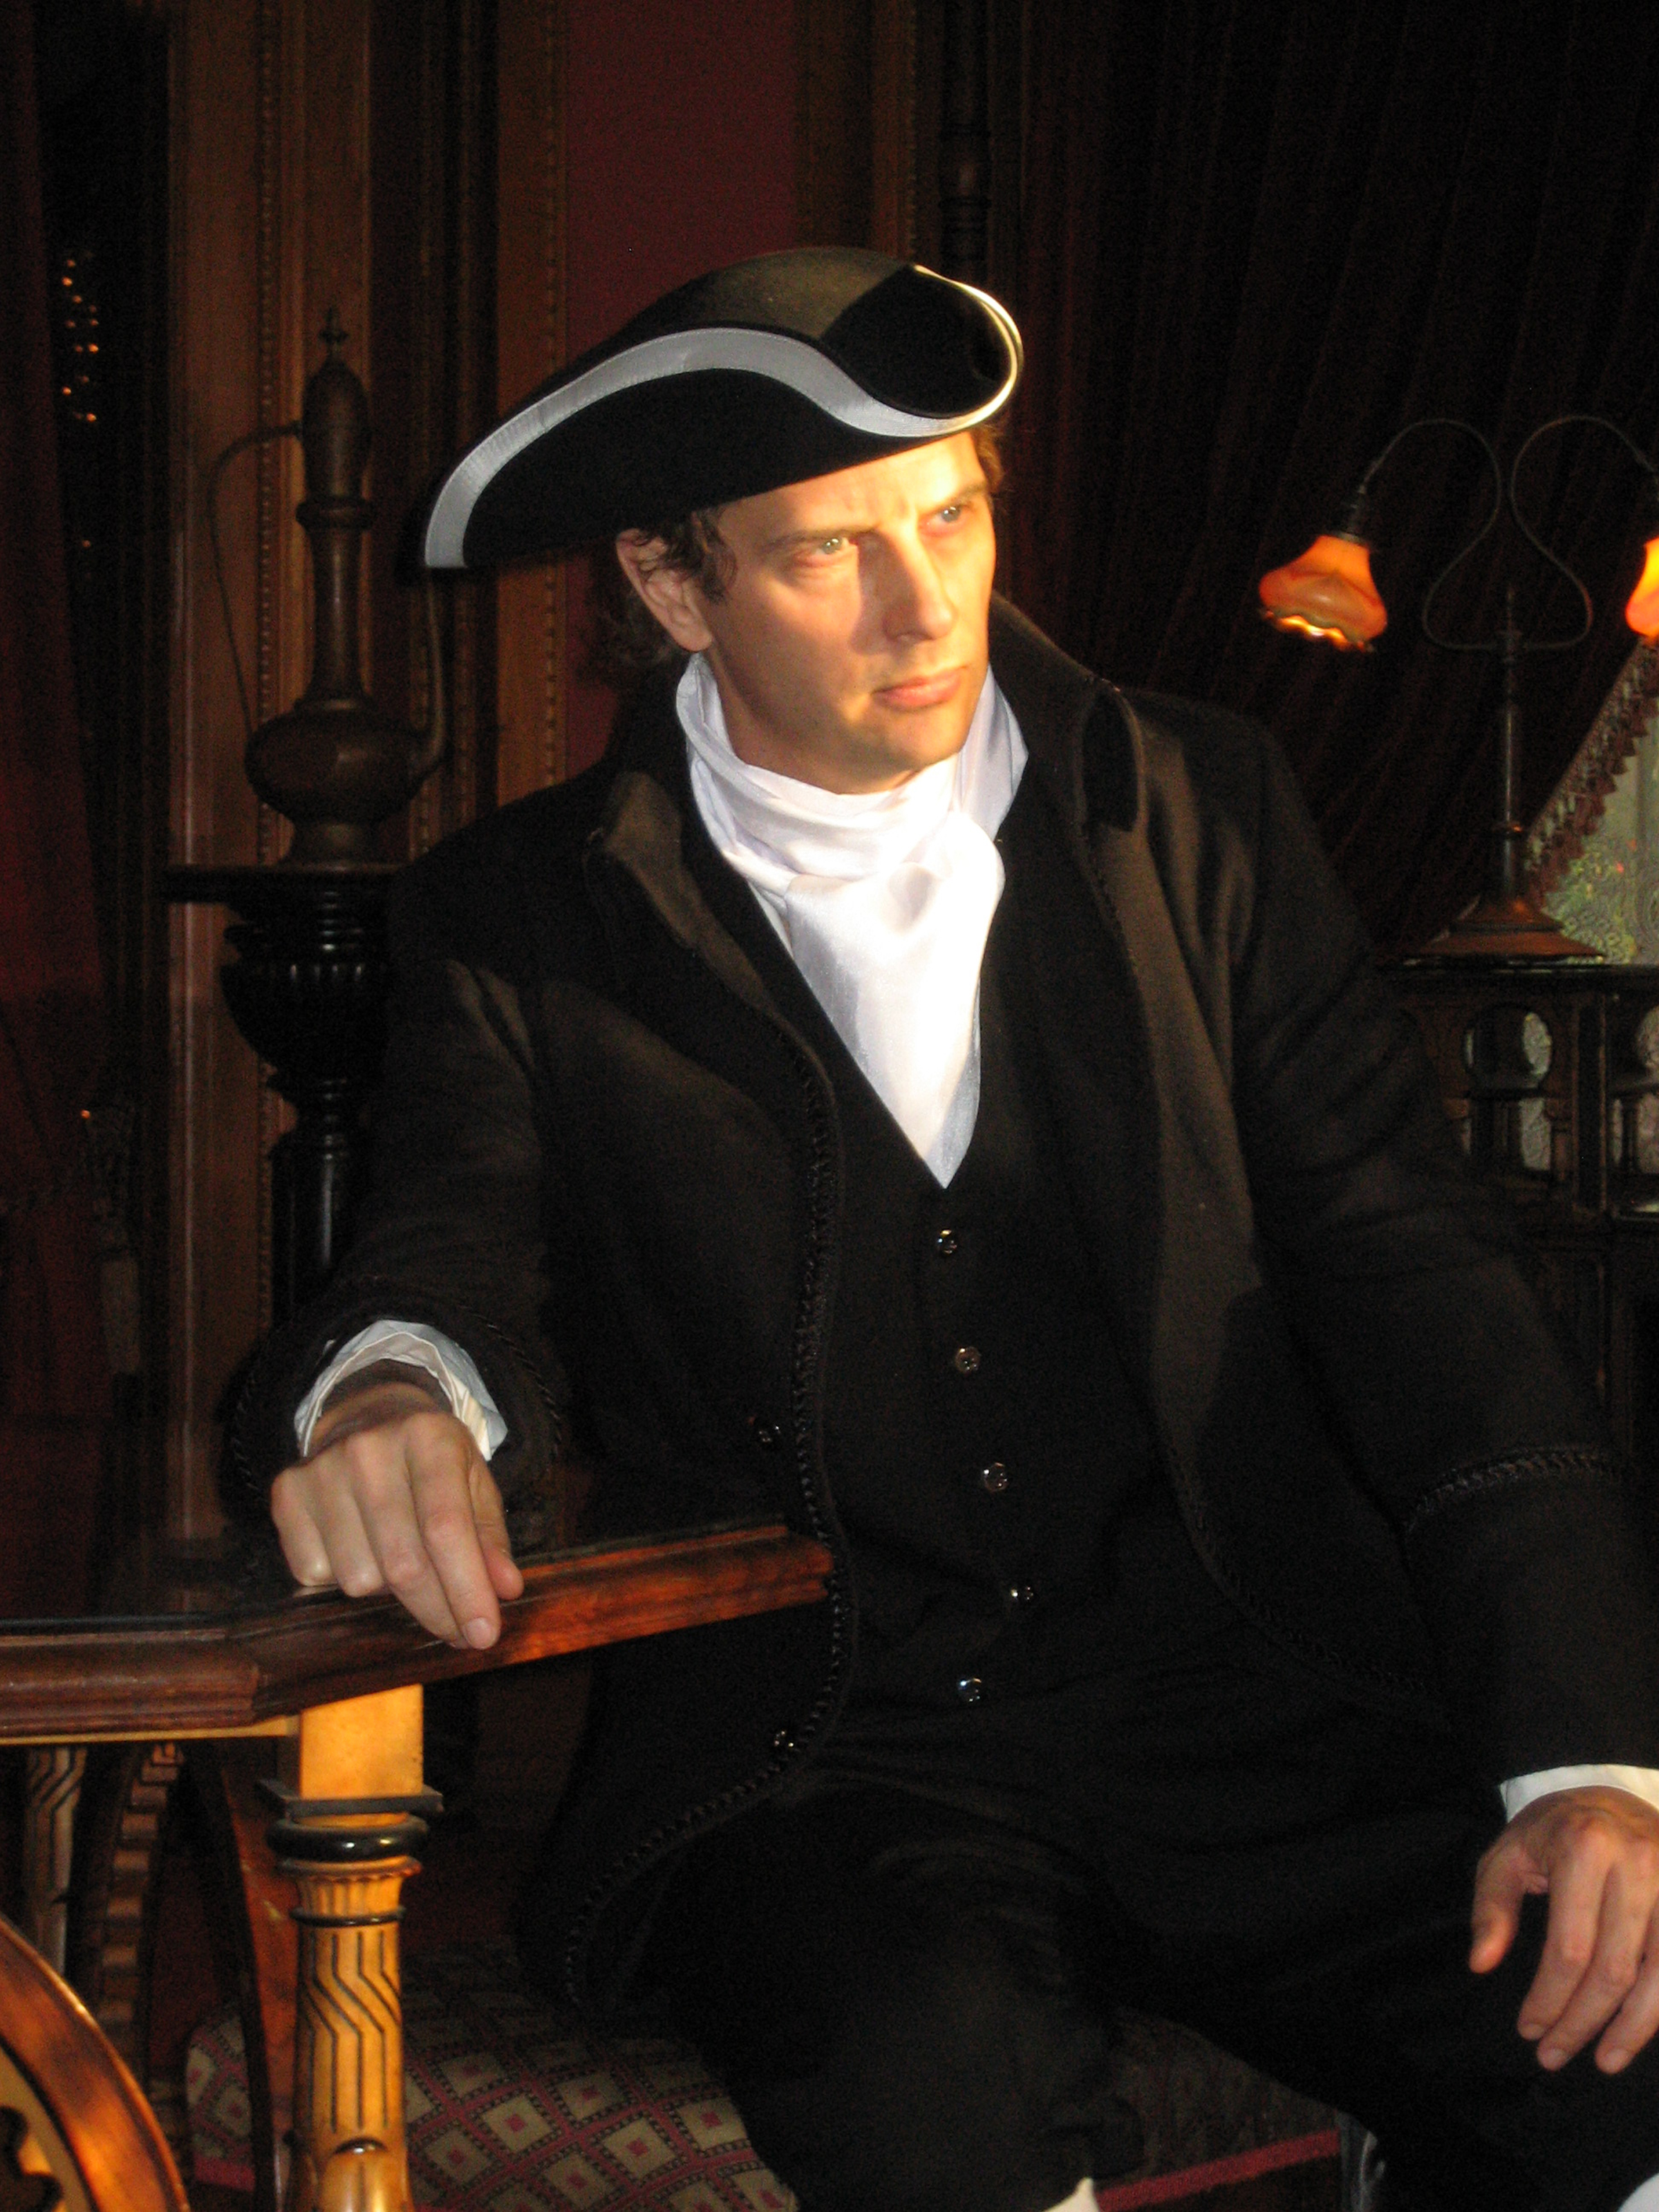 As THOMAS PAINE in a one-man show for THE THOMAS PAINE SOCIETY